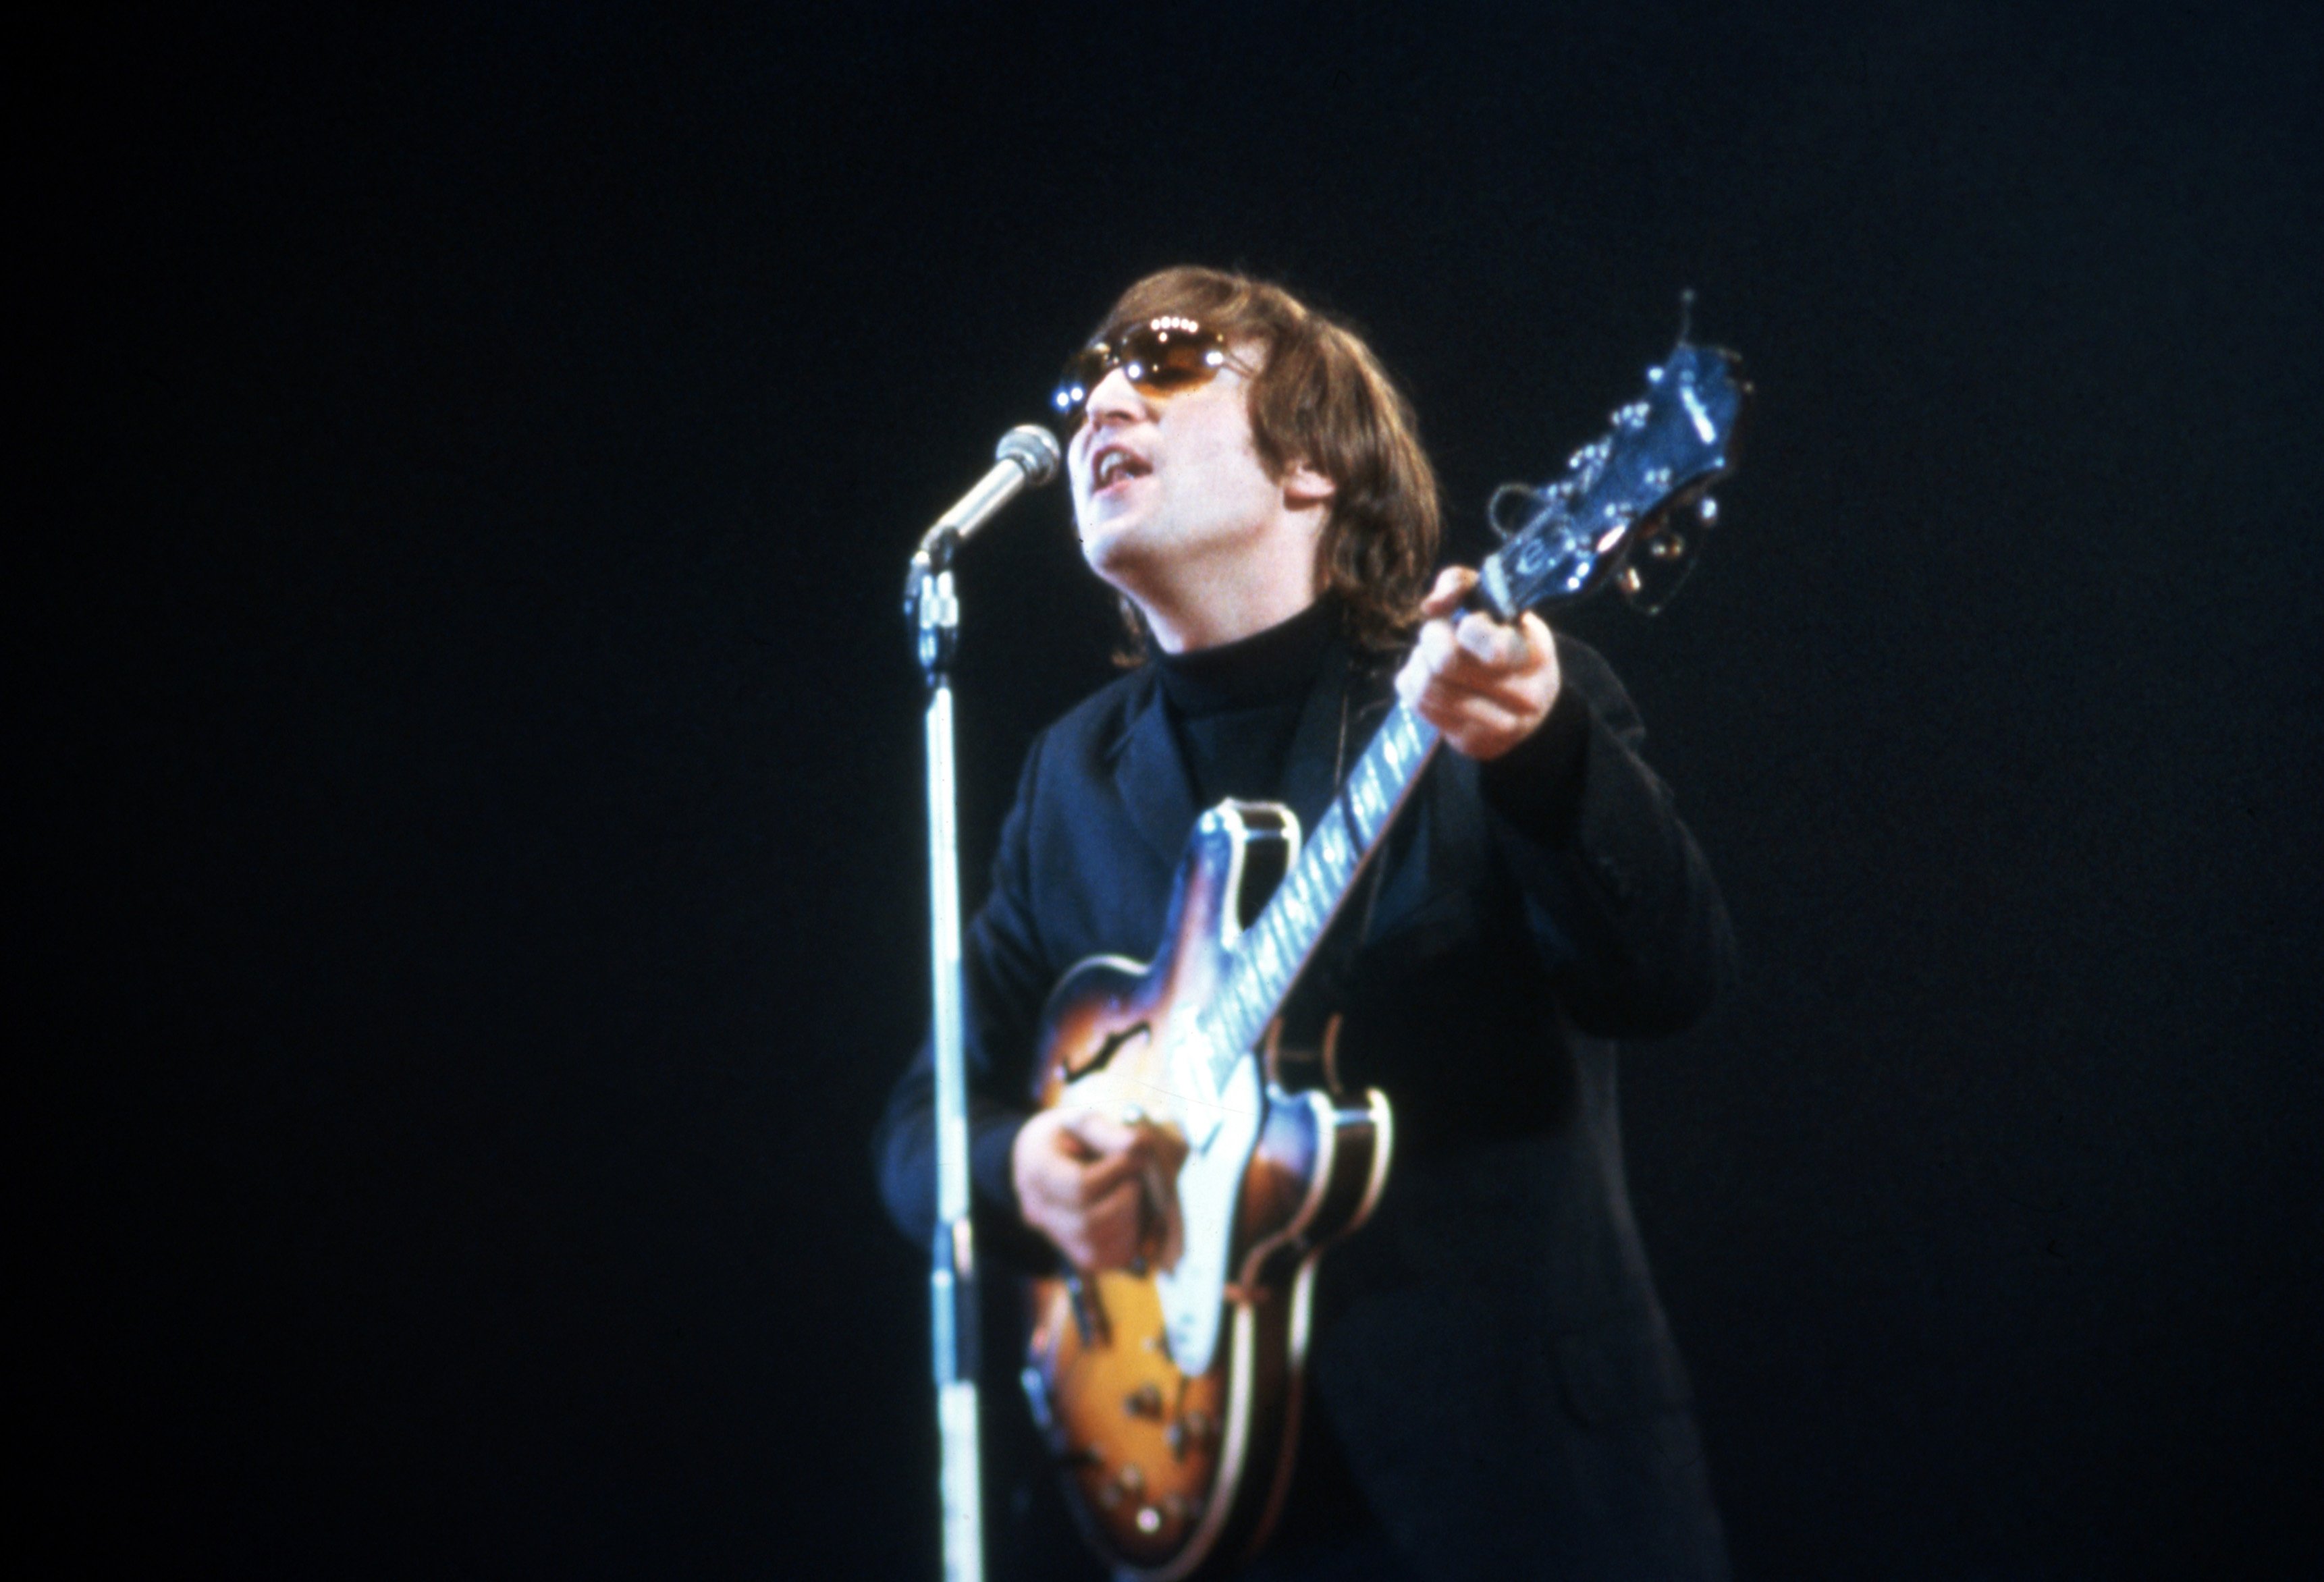 John Lennon of The Beatles performs at the NME Awards in 1966 in London, UK